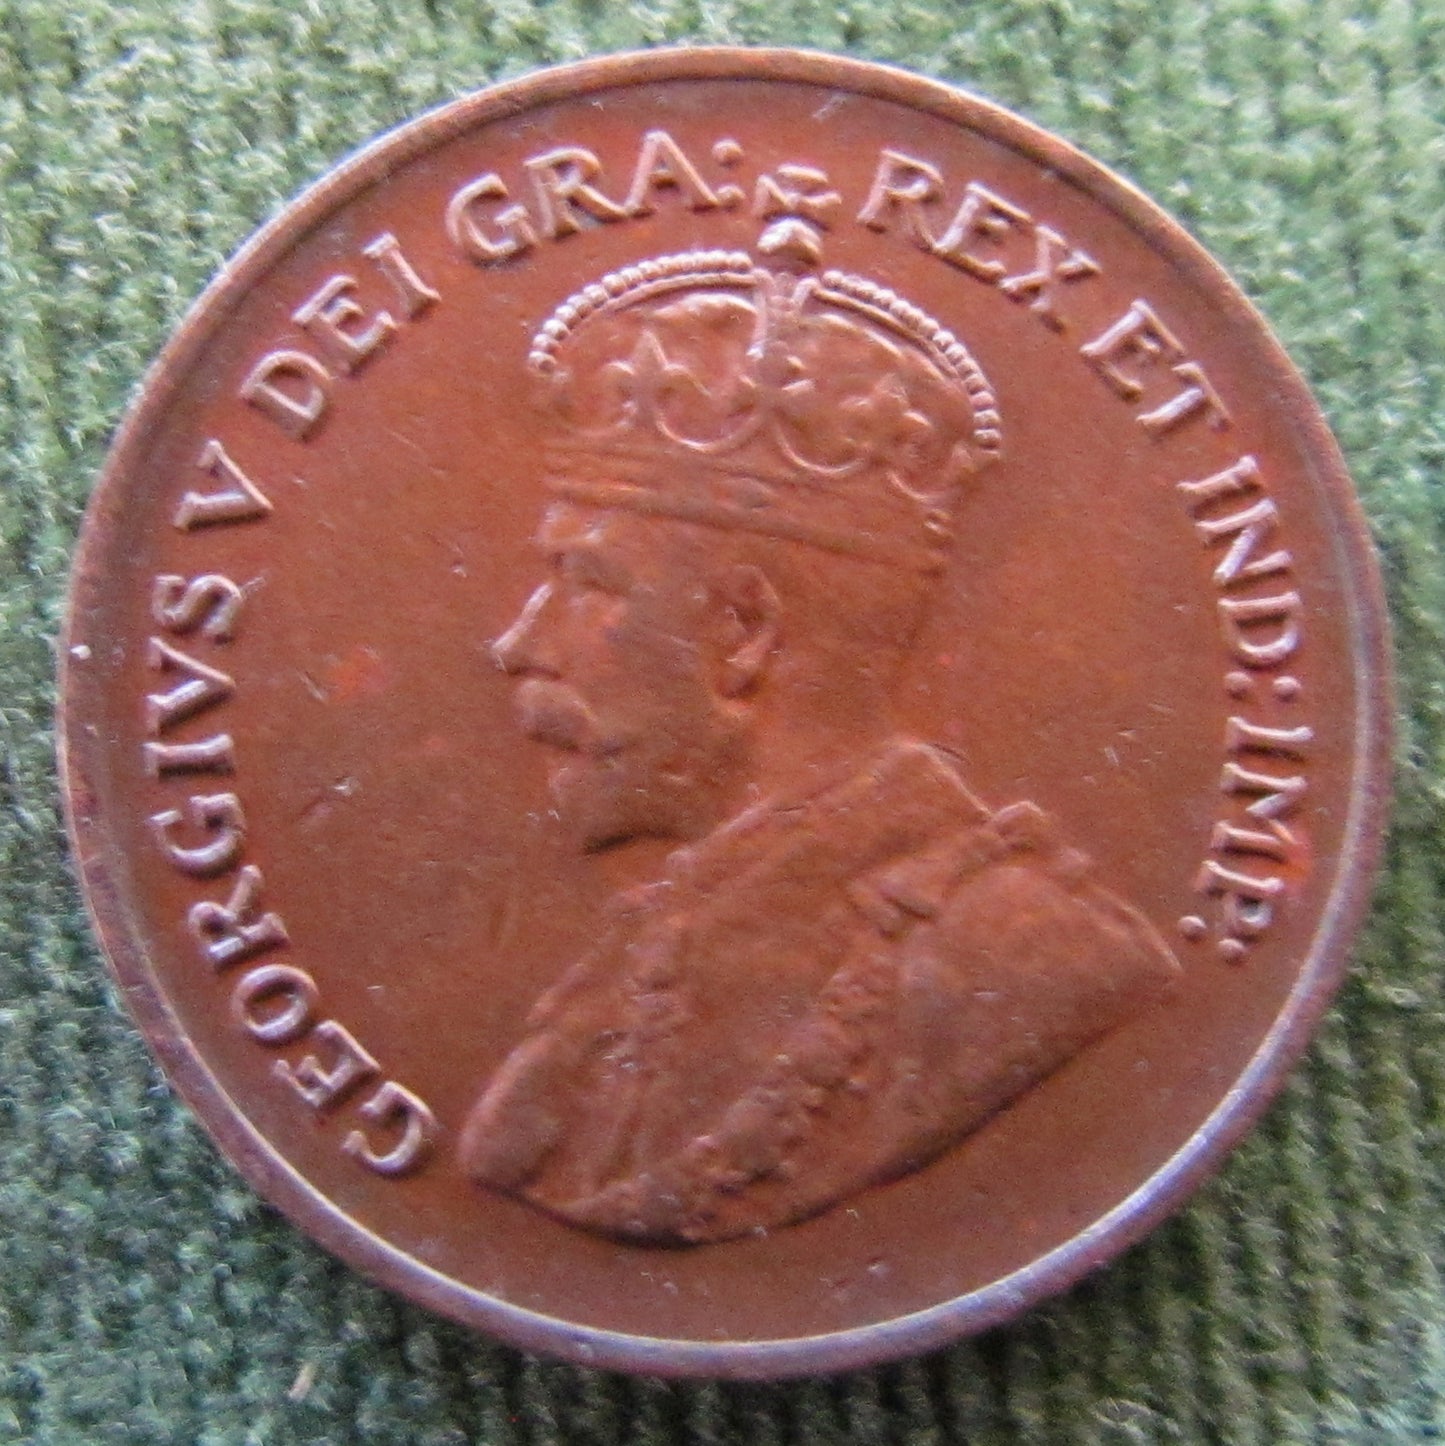 Canada 1932 1 Cent King George V Coin - Circulated